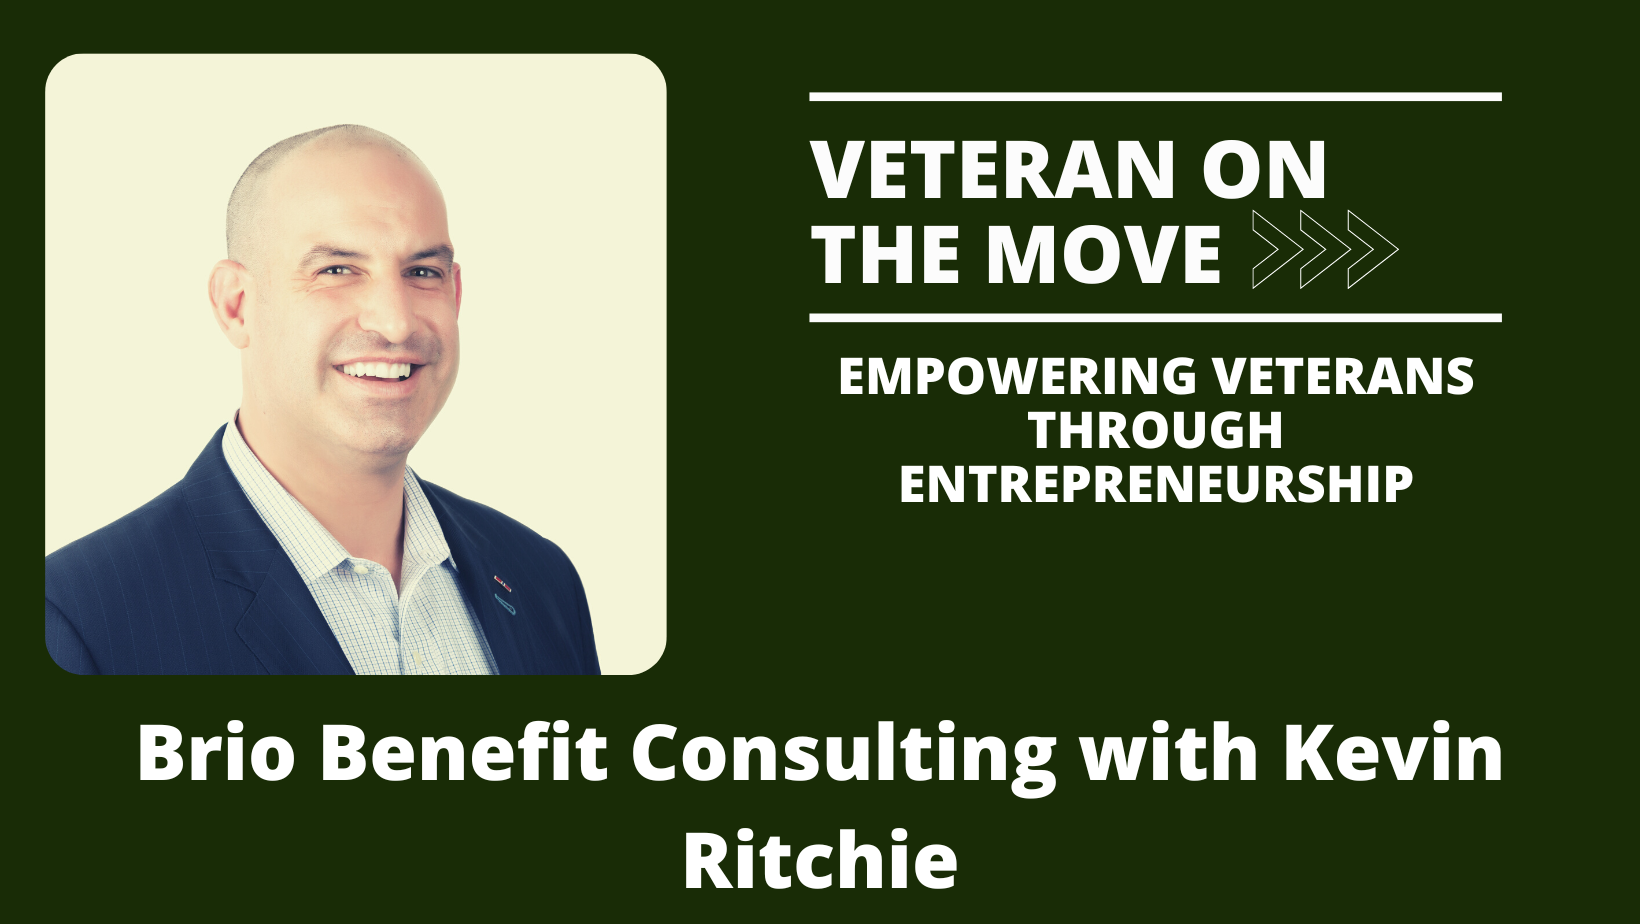 Brio Benefit Consulting with Kevin Ritchie